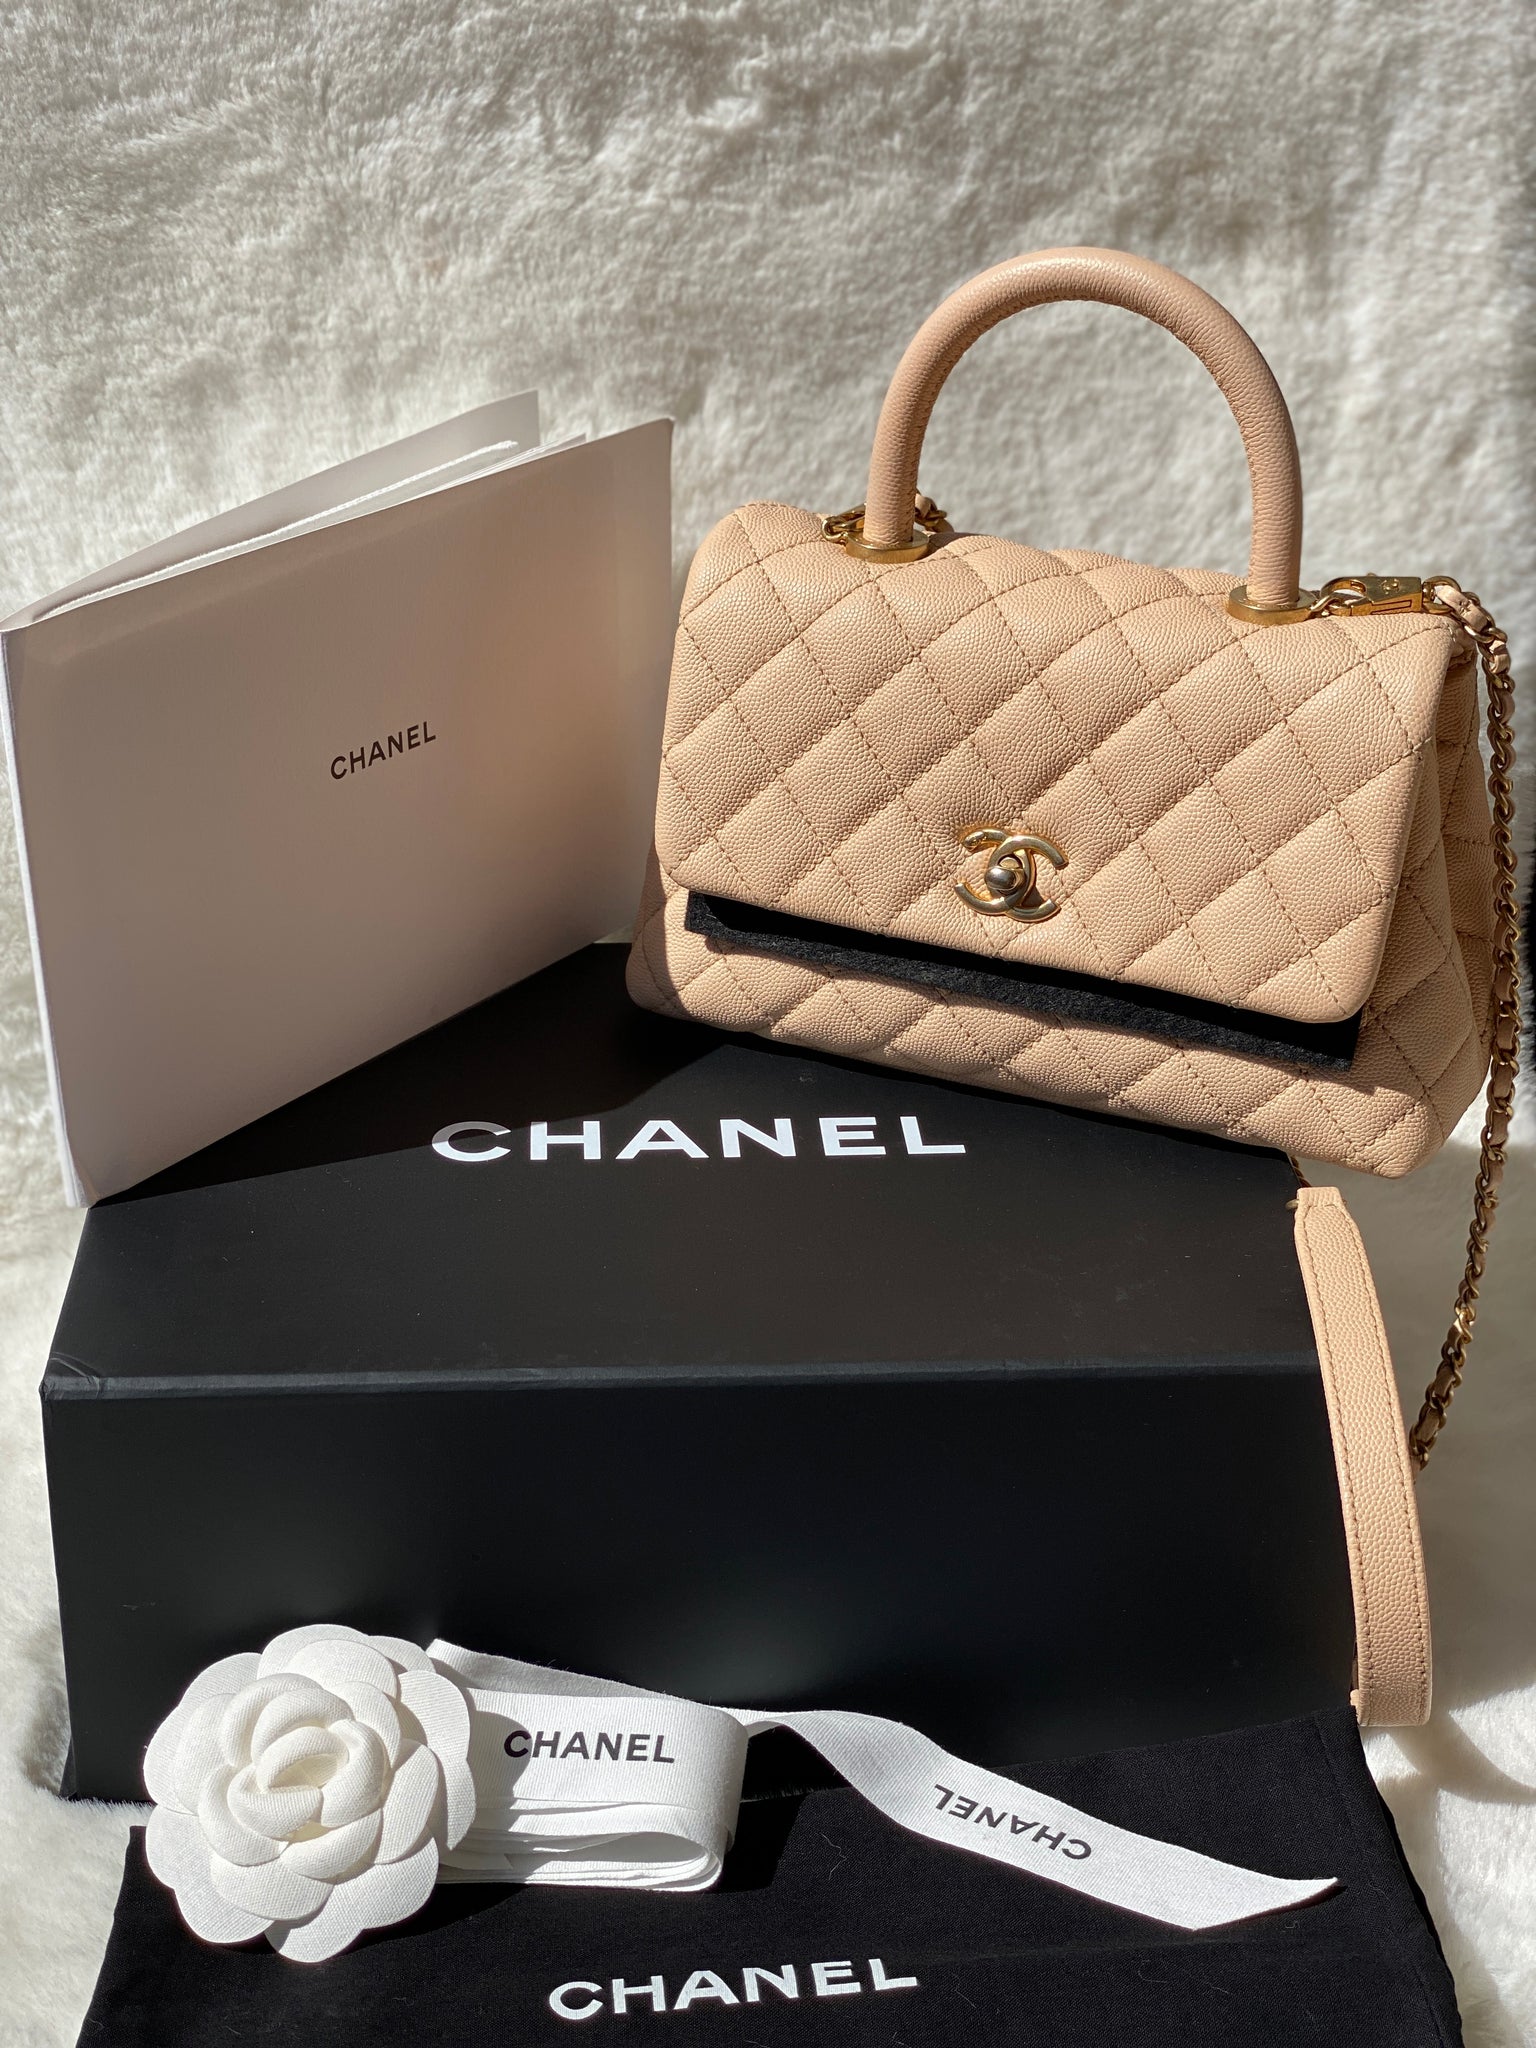 Chanel - Authenticated Coco Luxe Handbag - Leather Beige Plain for Women, Very Good Condition